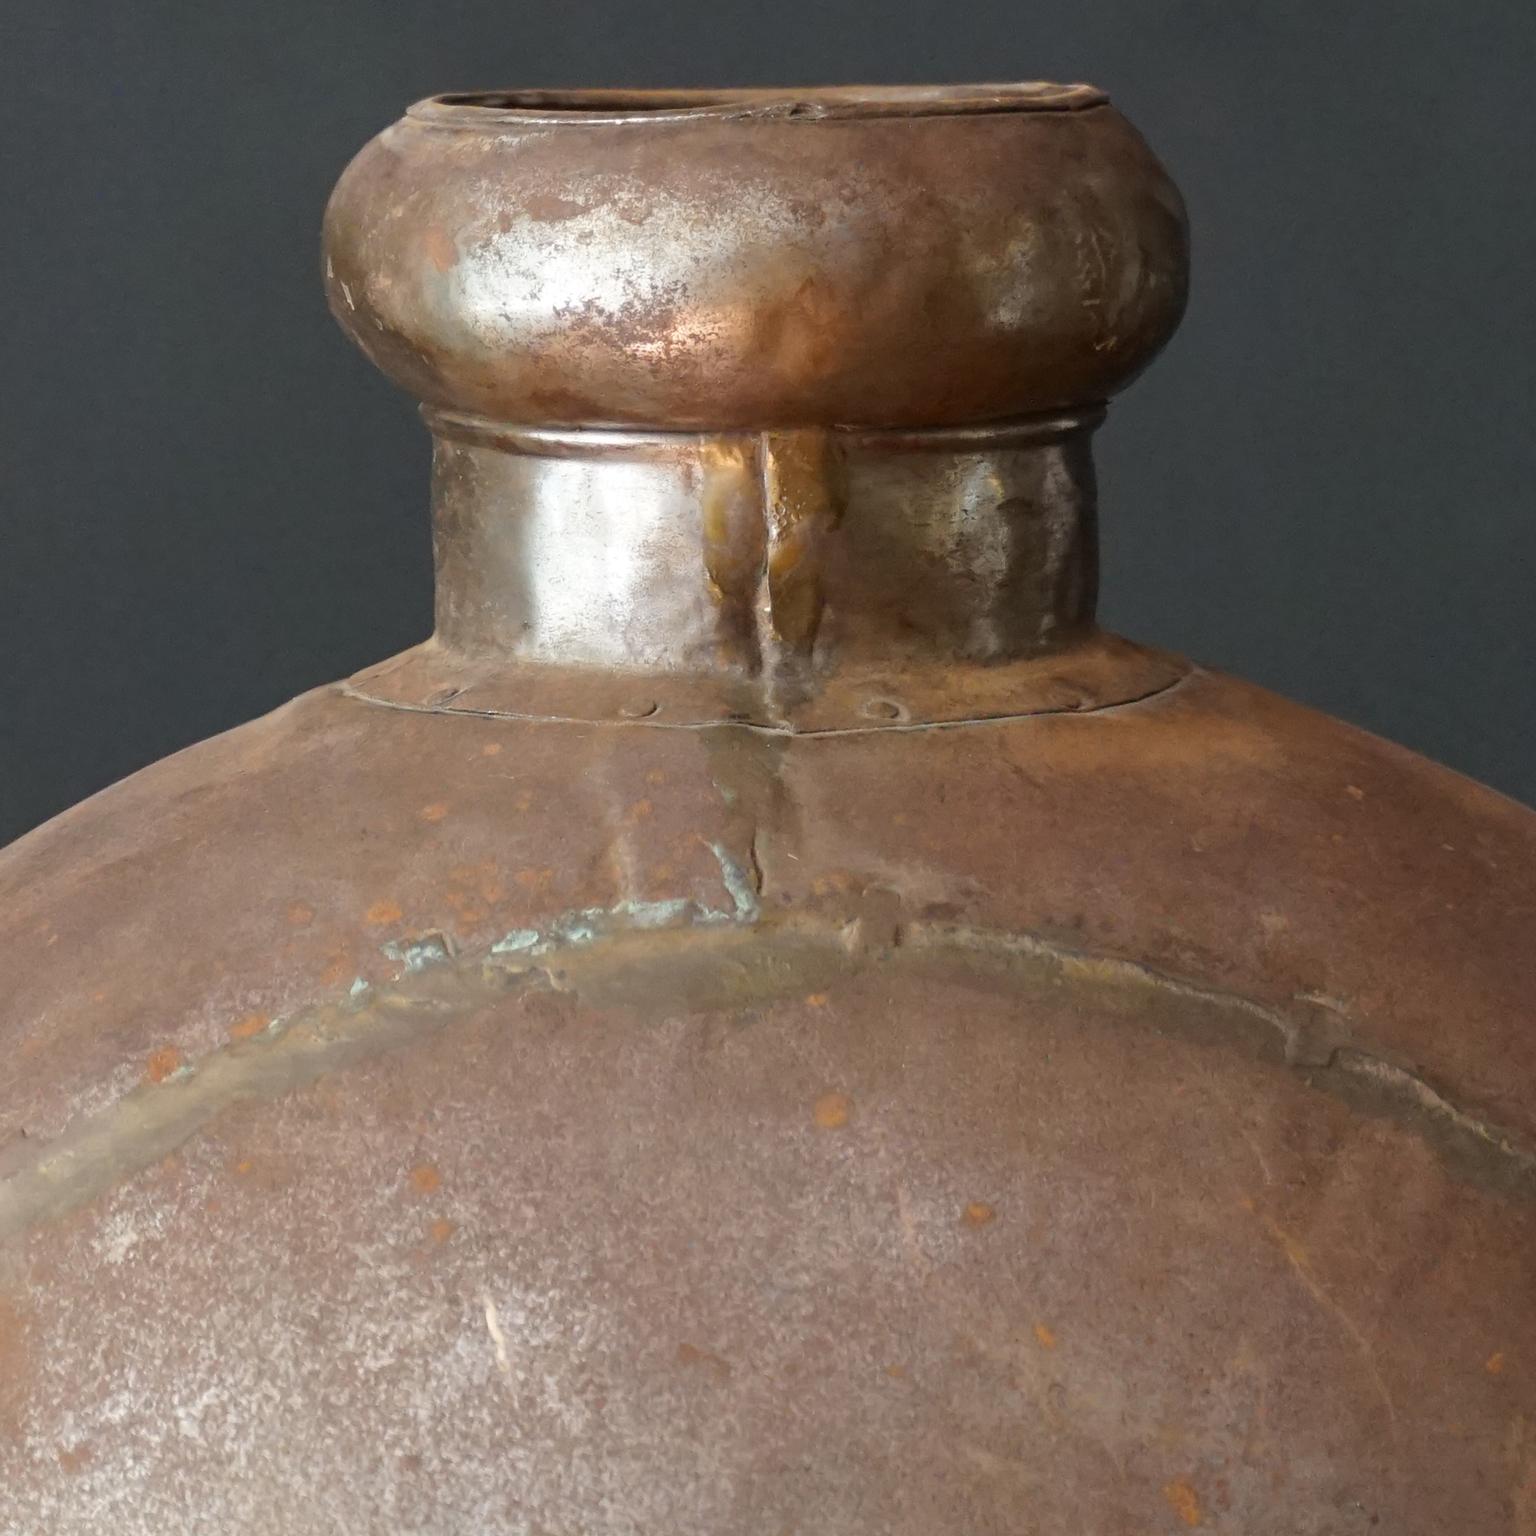 Iron 1950s Indian Hand-Hammered Large Metal Water Jug or Bottle with Wooden Cork For Sale